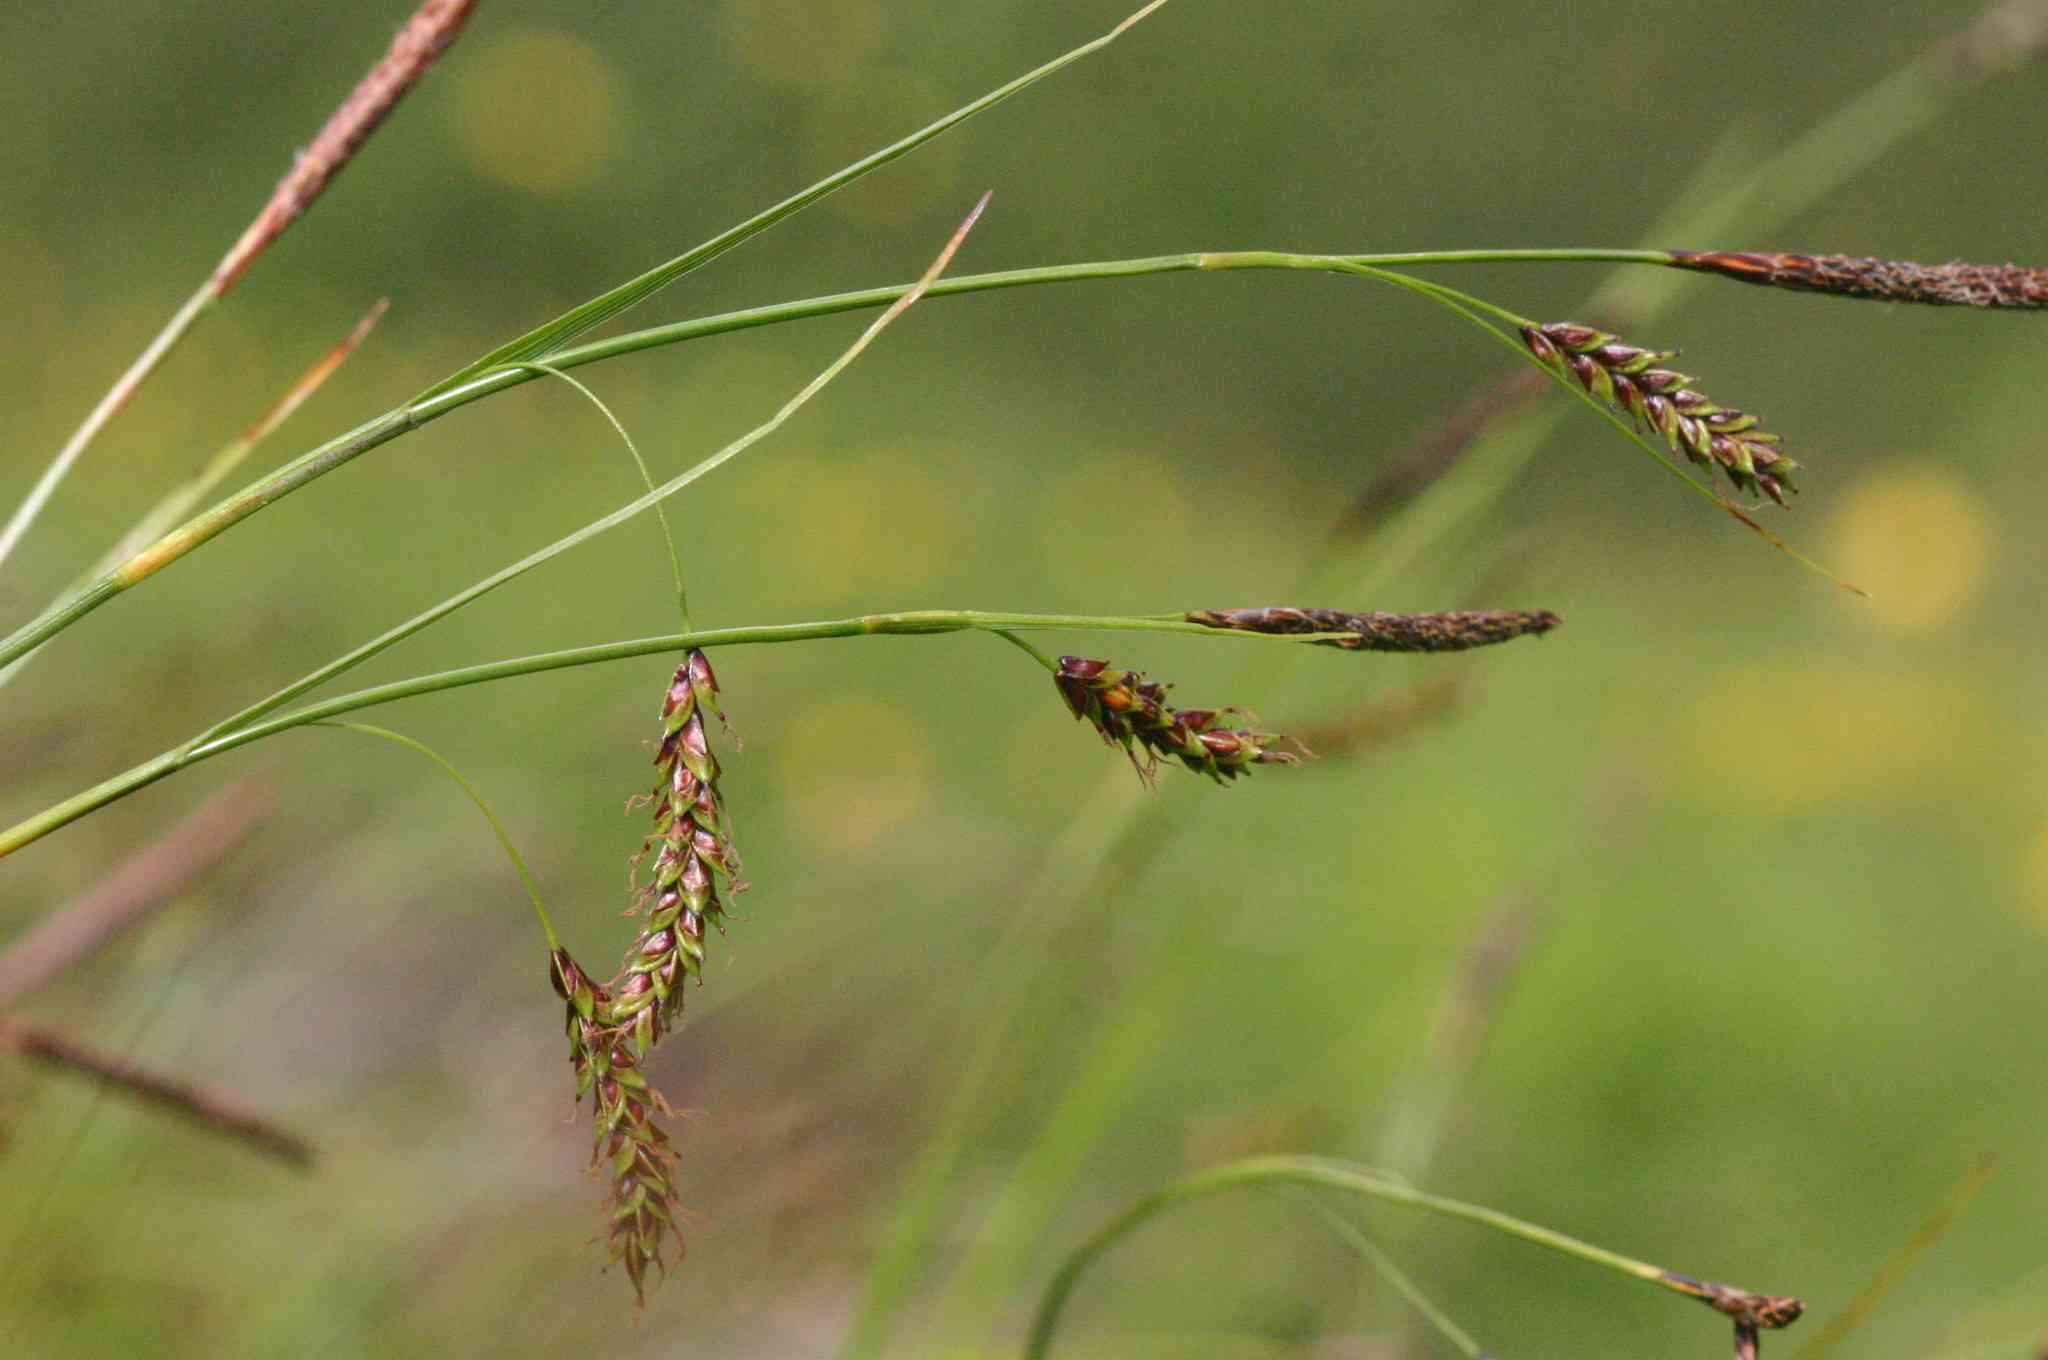 Laîche férrugineuse, Carex ferrugineux. © By Hermann Schachner - CC0, https://commons.wikimedia.org/w/index.php?curid=12464107